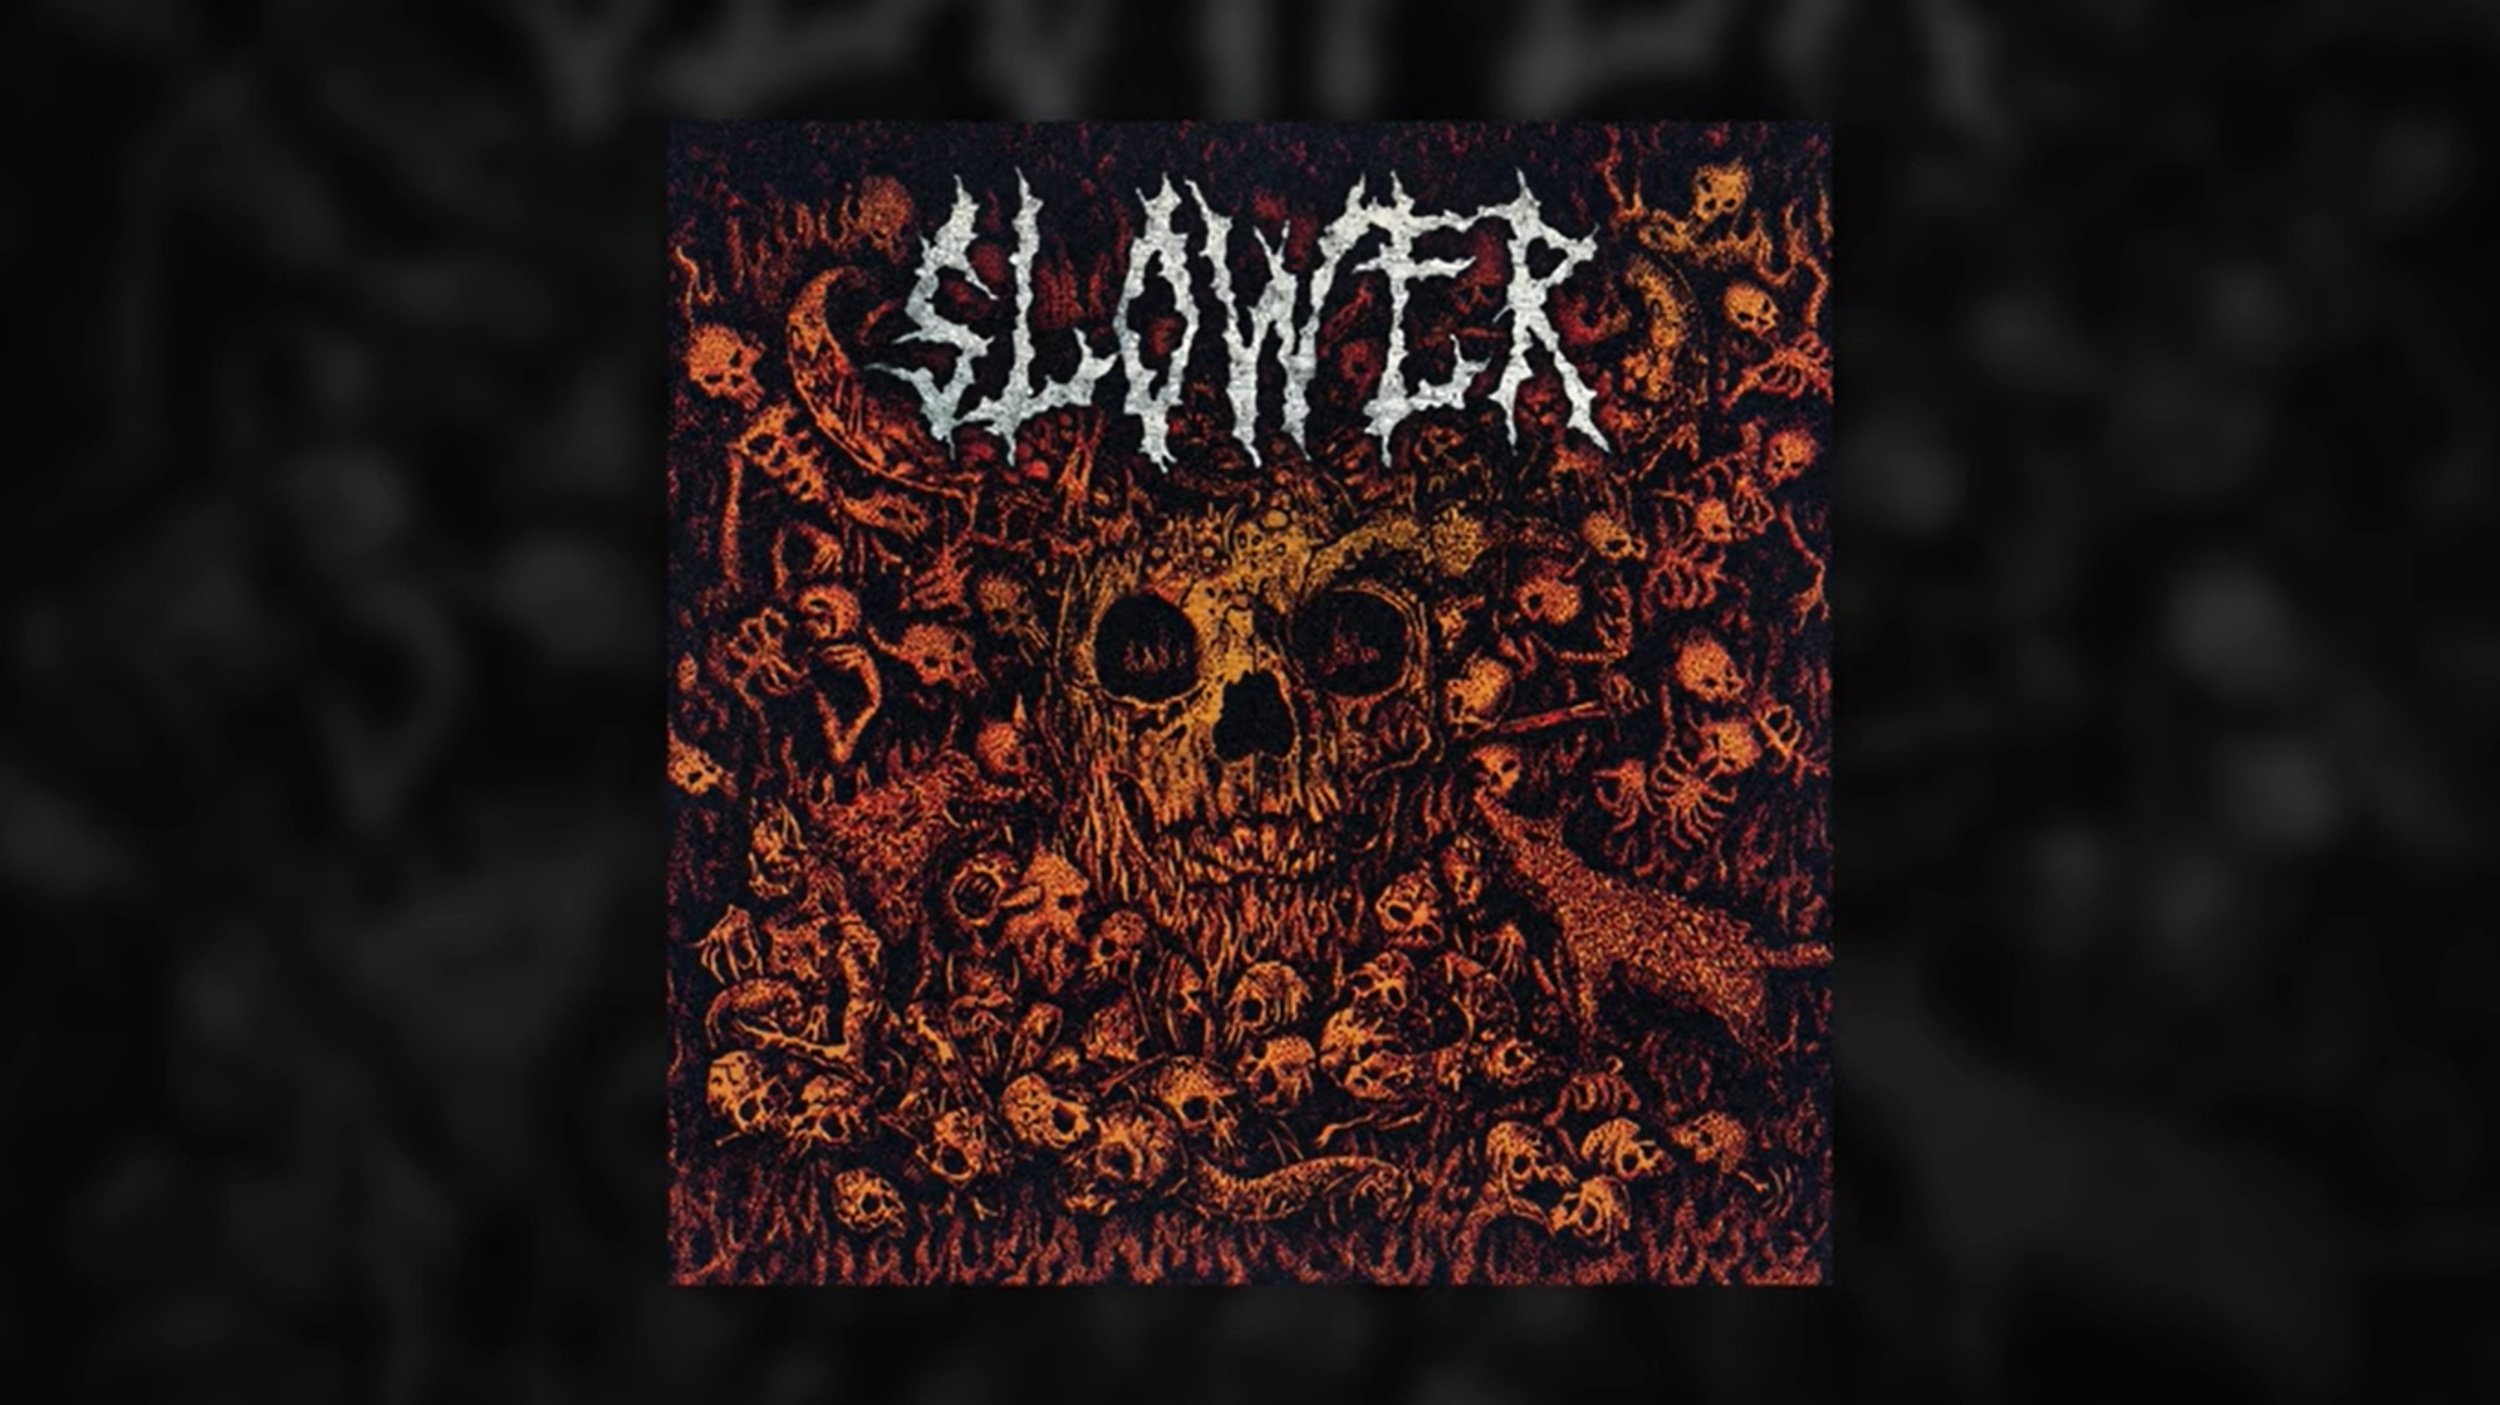 <p>When Slayer disbanded in 2019, I'm not sure the world at large knew just how big of a vacuum would be left, or what it would take to fill it. Fu Manchu guitarist Bob Balch slowed down "South of Heaven" to teach a beginning student how to play it, and the seed had been planted. He enlisted friends from Kyuss, Monolord, Year of the Cobra, Lowrider, and Kylesa to fill out the album. From the singles already released, the album promises to be a doomy good time.</p><p>You may also like: <a href='https://www.yardbarker.com/entertainment/articles/movies_featuring_real_life_mother_daughter_duos/s1__39344990'>Movies featuring real-life mother-daughter duos</a></p>